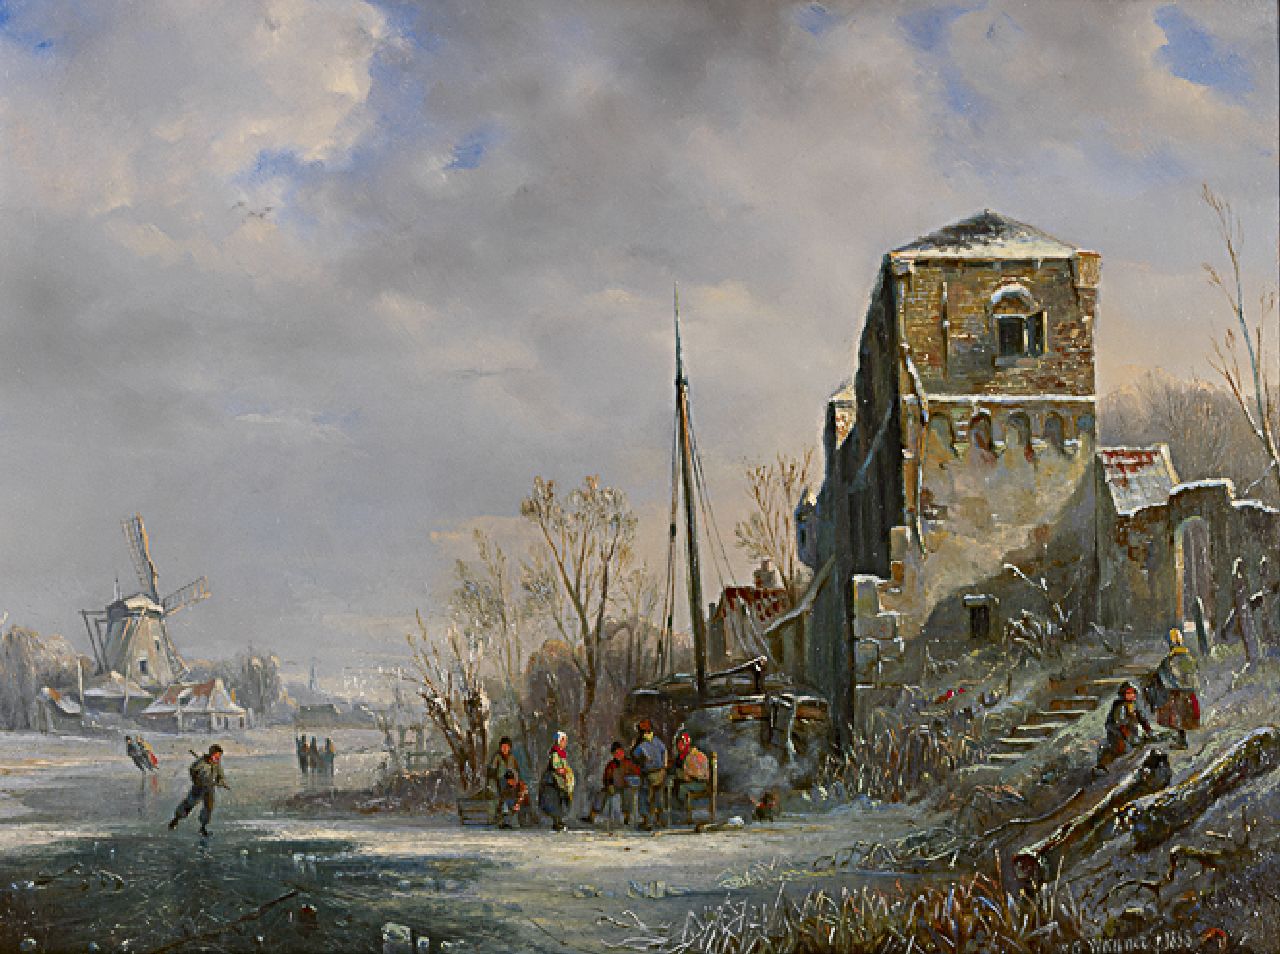 Wagner W.G.  | Willem George Wagner, Canal in the snow with skaters on the ice, oil on panel 39.3 x 52.4 cm, signed l.r. and dated 1838